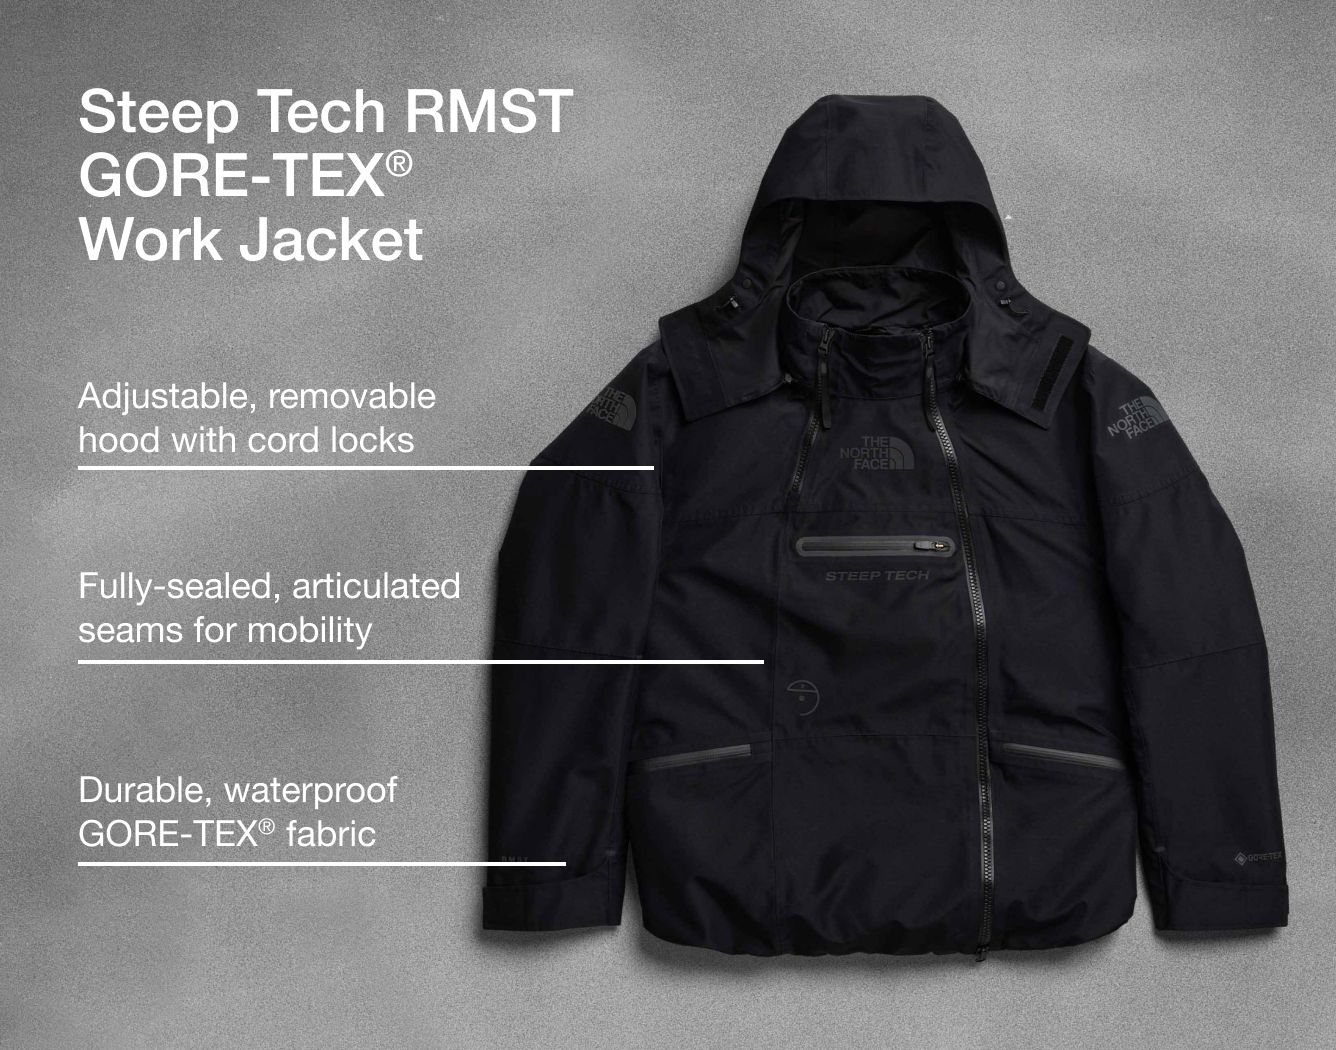 Studio shot of the Steep Tech RMST Work Jacket with text overlay pointing out fabrication and seams.